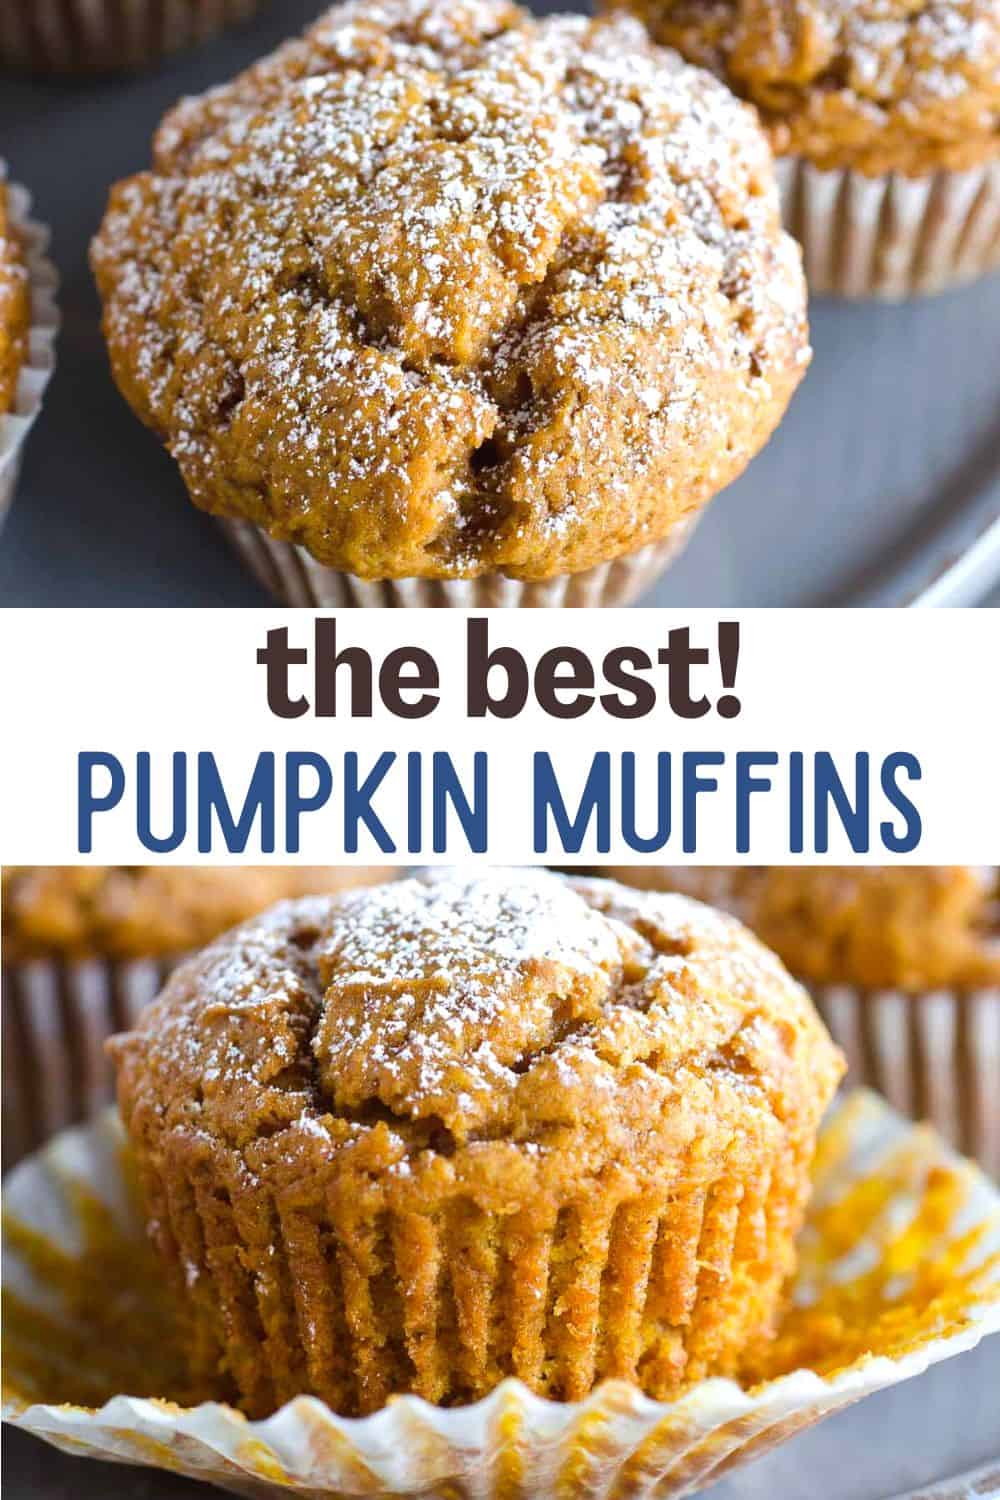 These pumpkin muffins are the best and very easy to make!  Perfectly fluffy and not at all dry, these muffins are a delicious combination of sweet and spice.